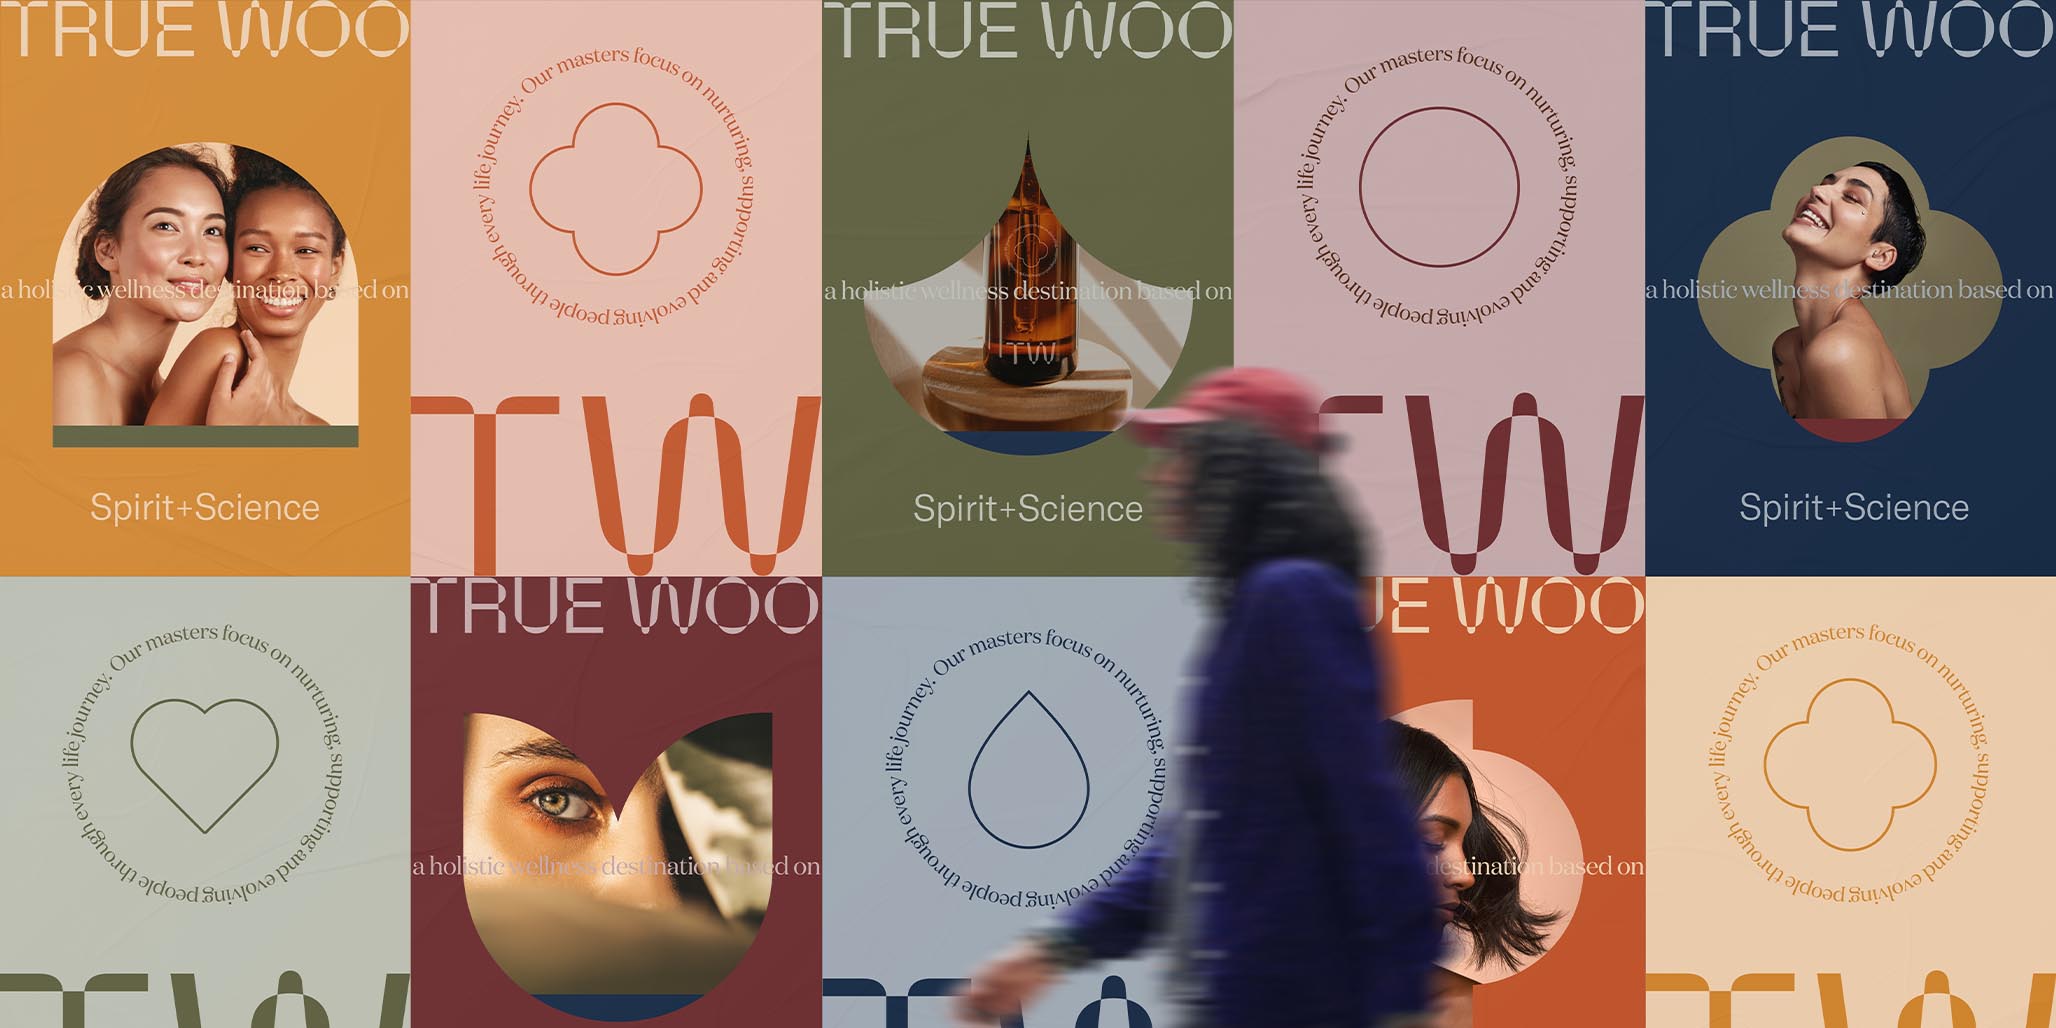 Brand Positioning and Brand Identity for True Woo Created by Percept